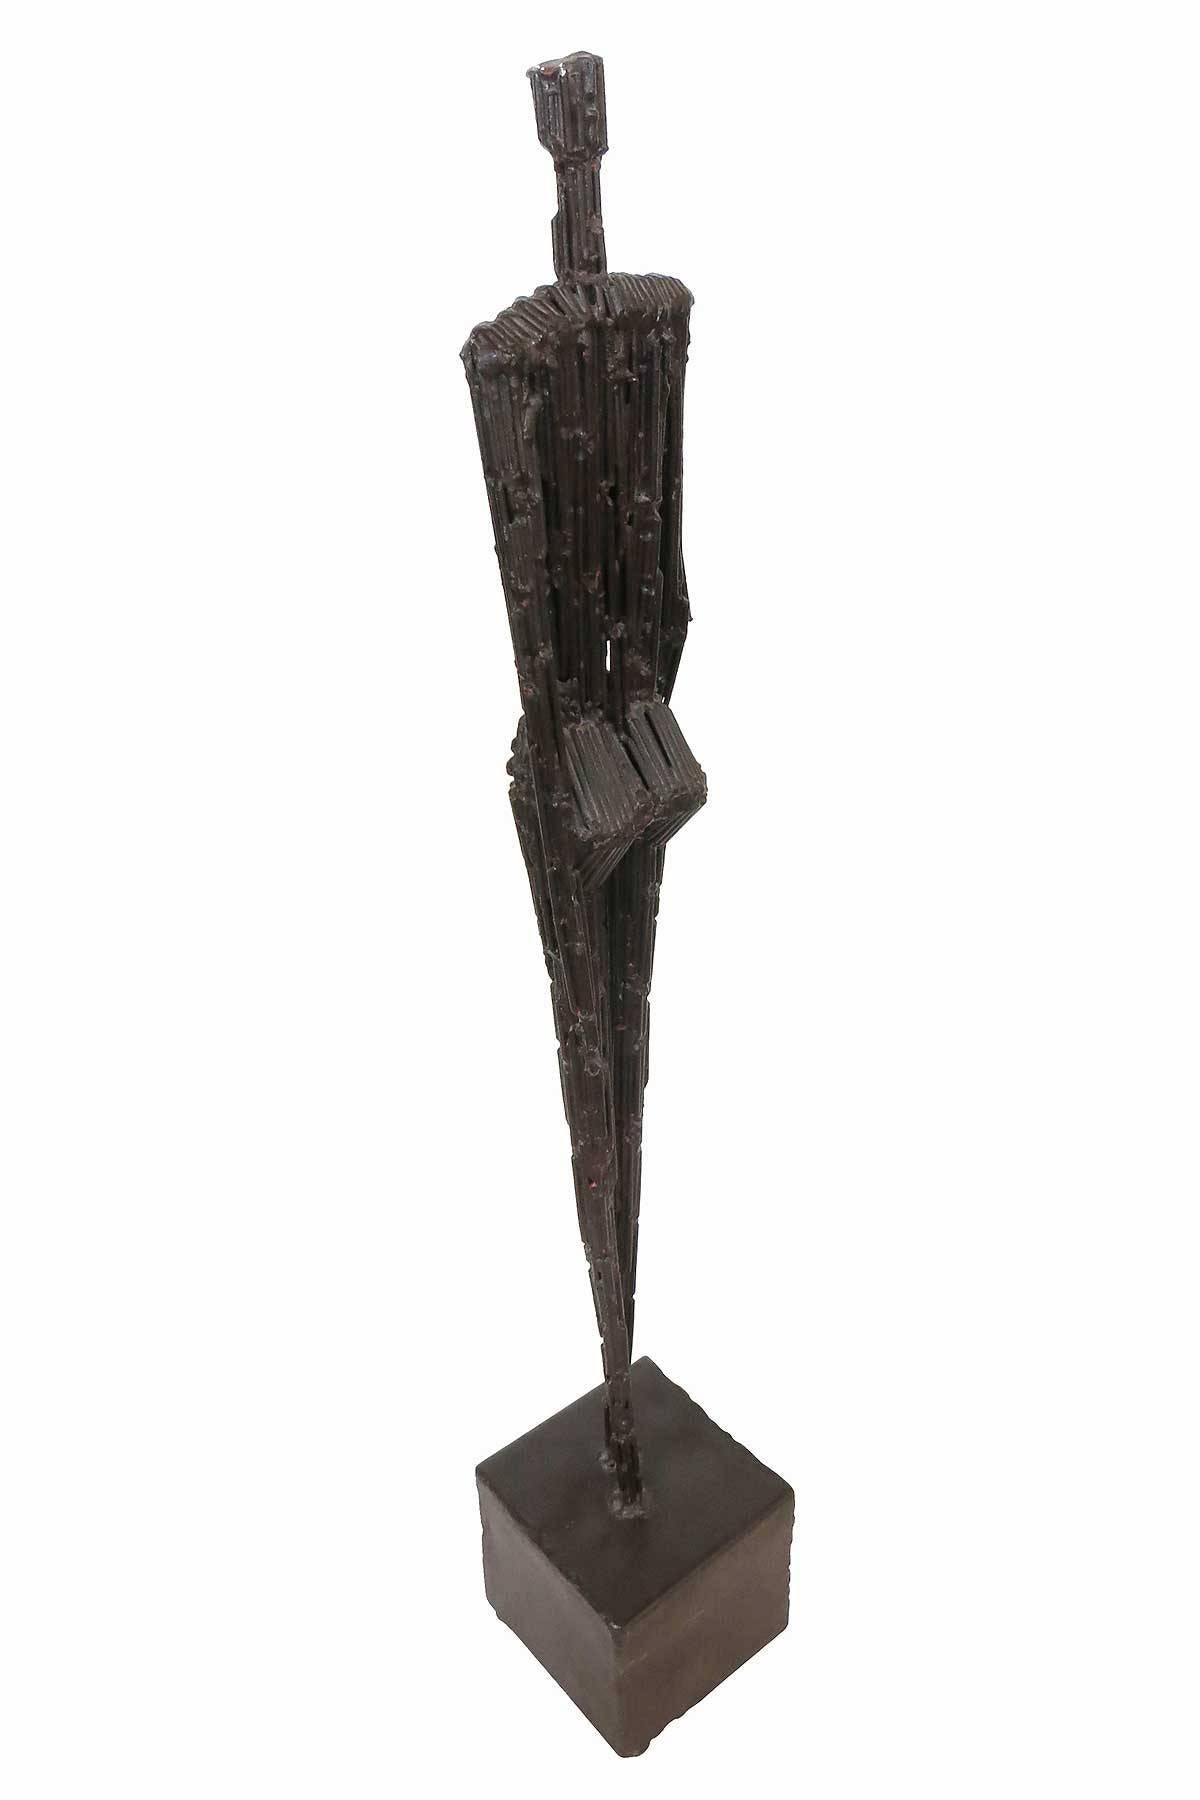 American Pair of Nail Sculptures in the Manner of Giacometti